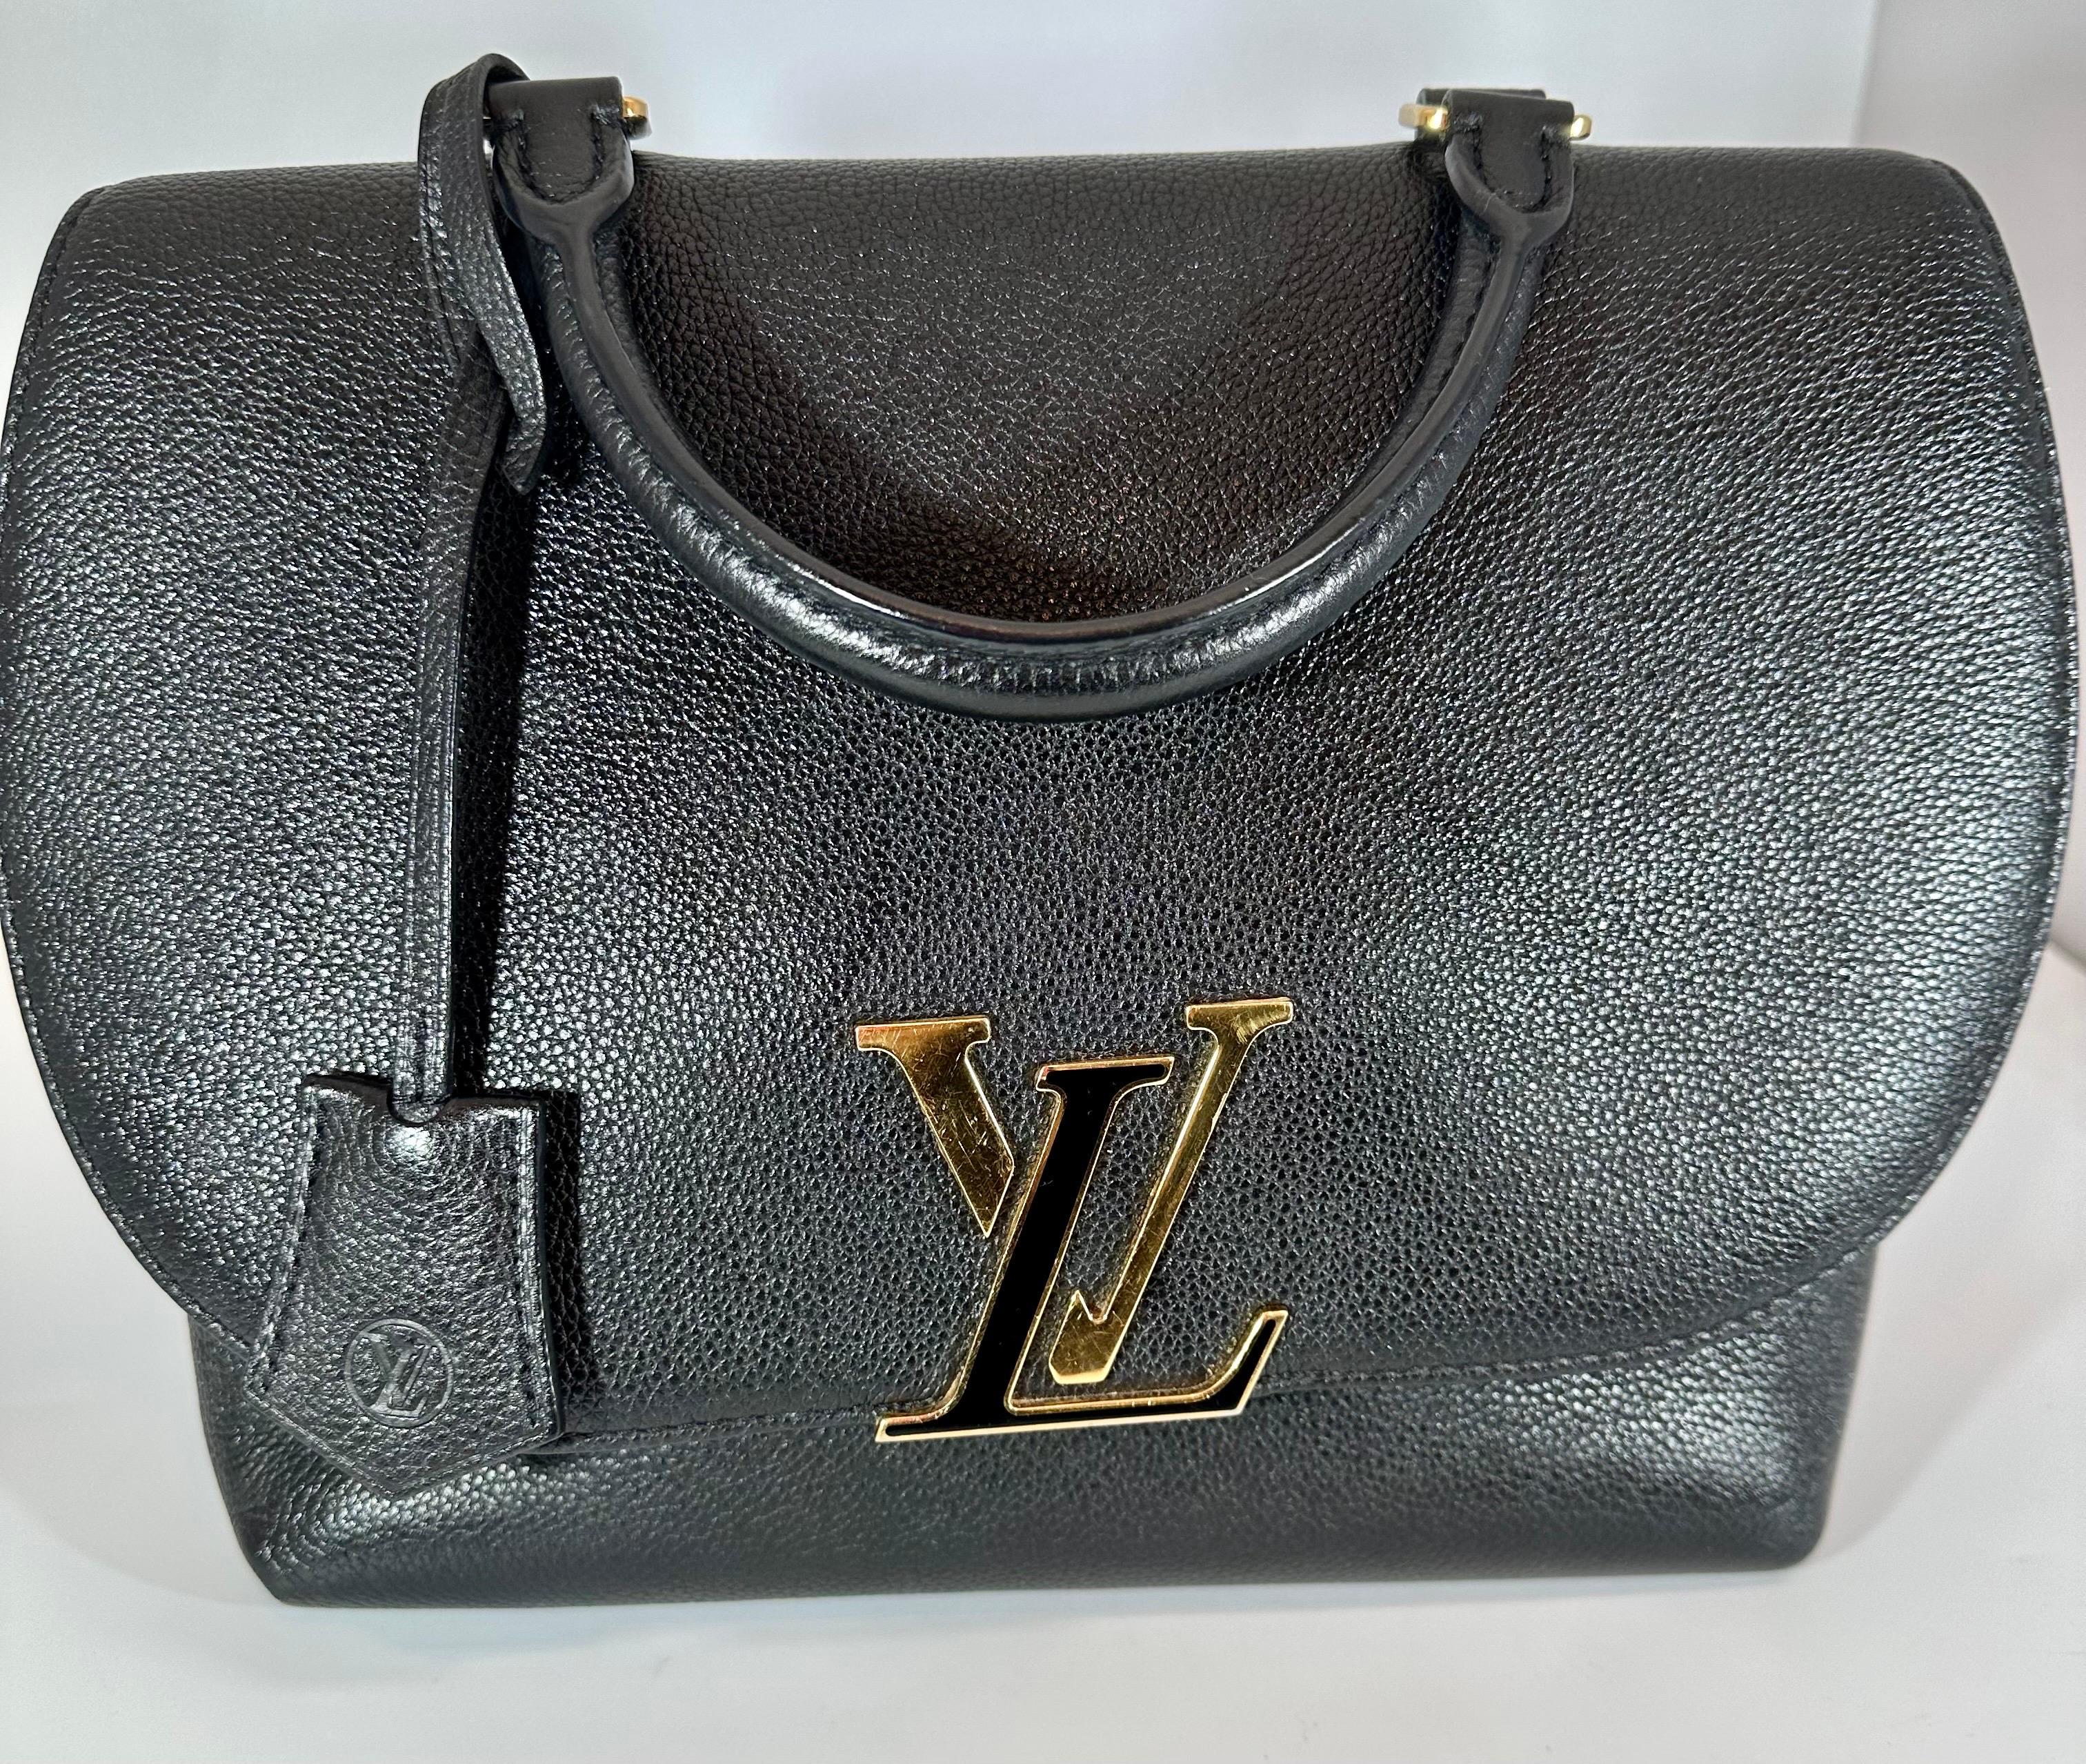 Perfect for the a woman on-the-go, this gorgeous and newer creation from Louis Vuitton is perfect for the LV lover who also wants a functional everyday bag! The Volta is made from supple Taurillon pebbled leather and can be worn light a classic